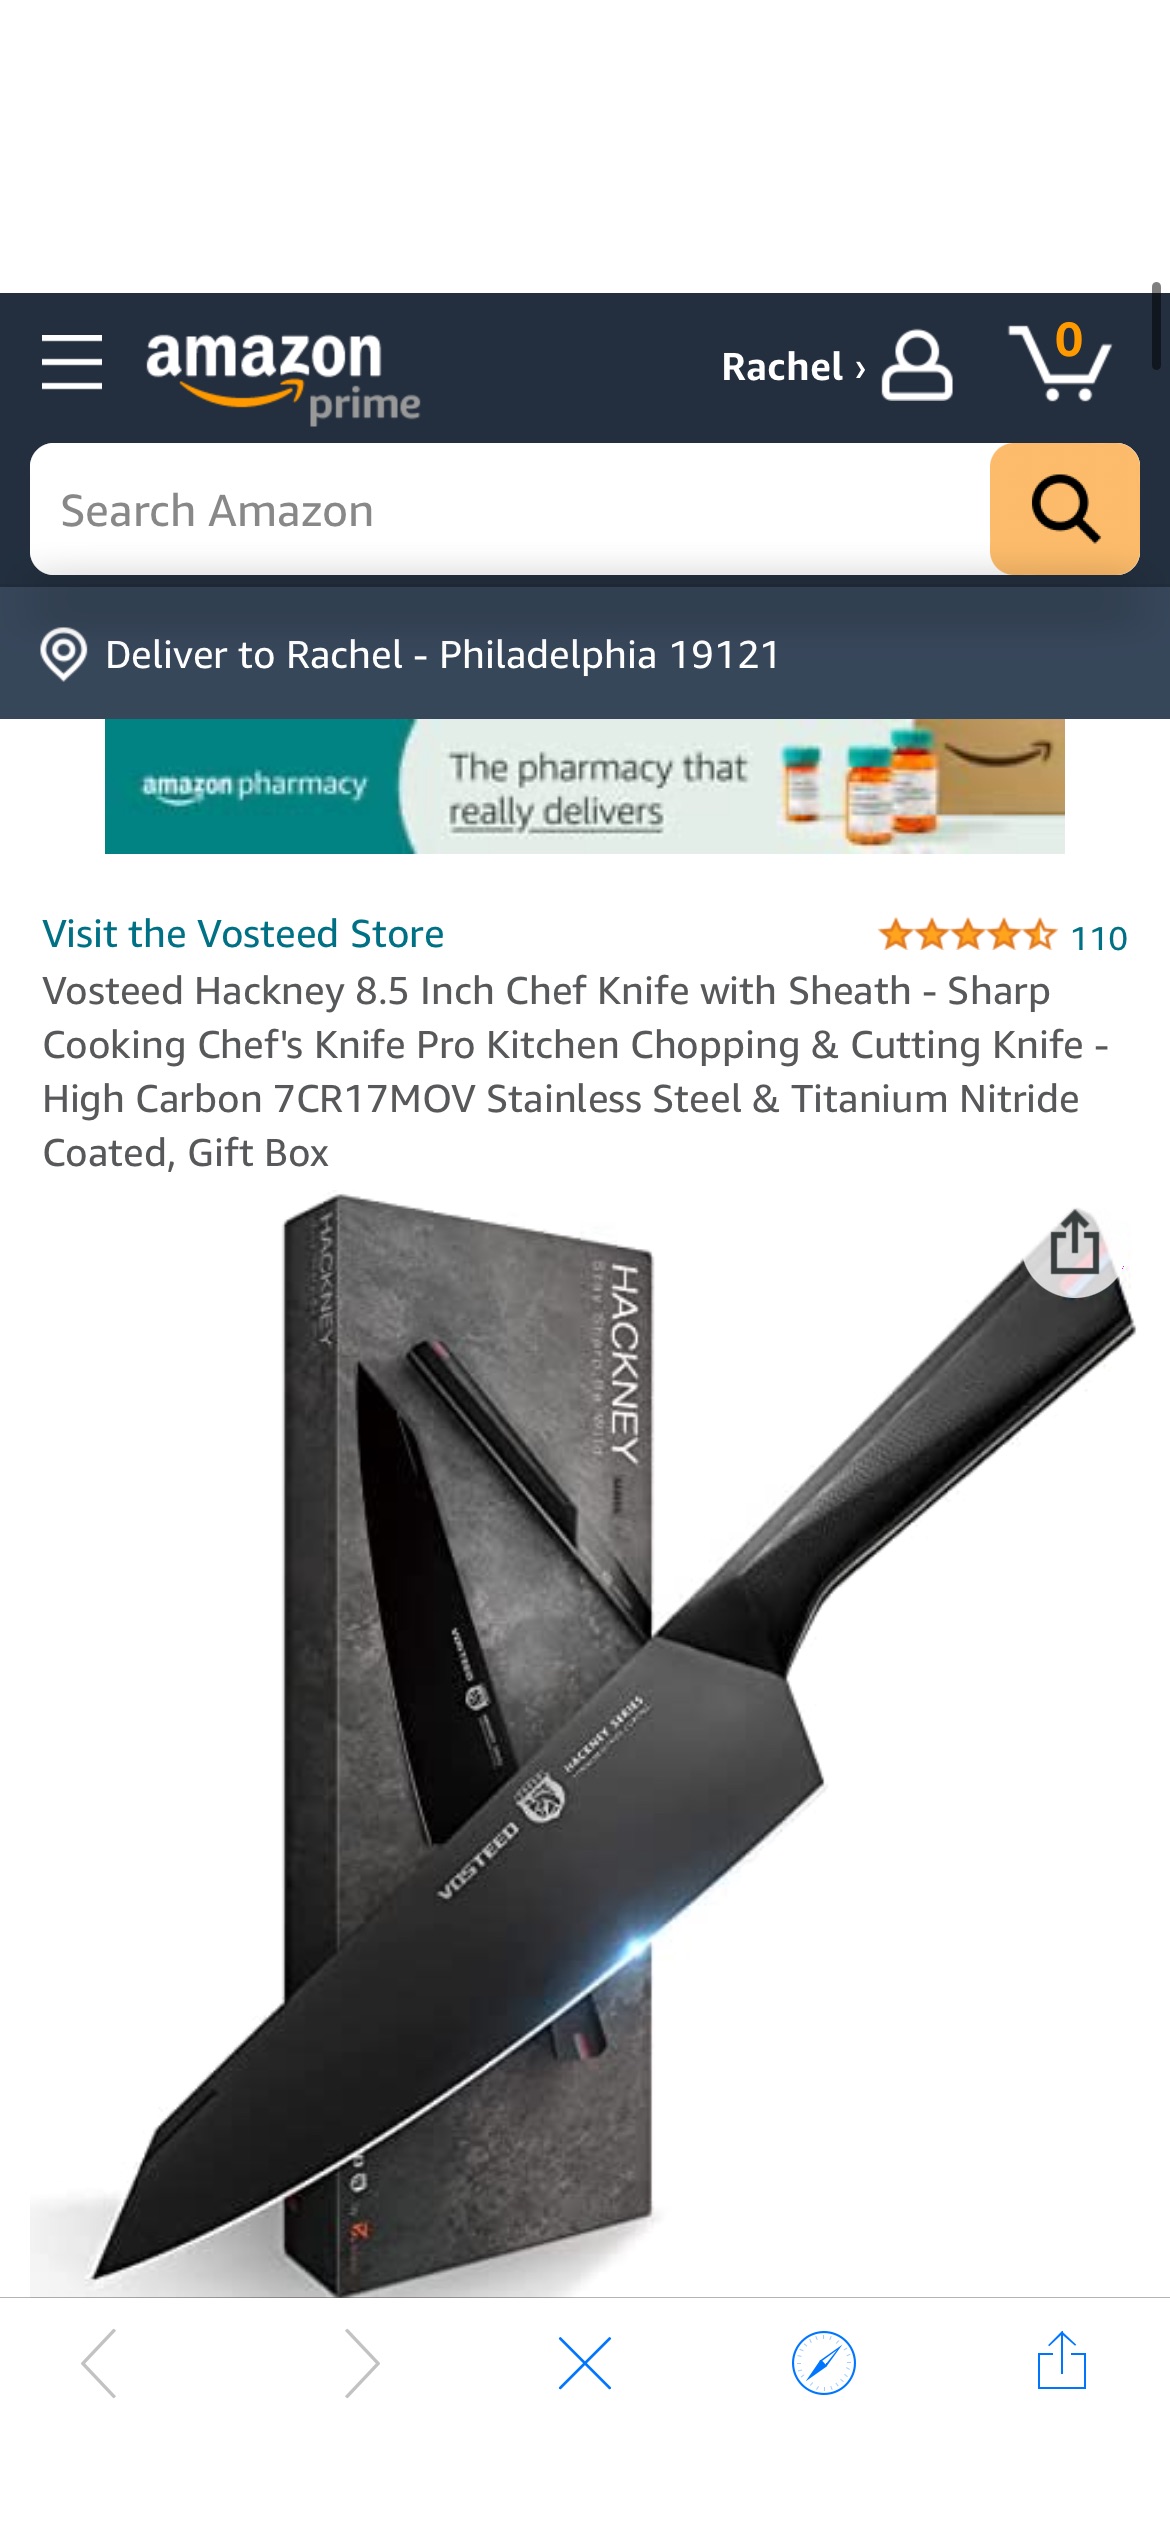 Amazon.com: Vosteed Hackney 8.5 Inch Chef Knife with Sheath - Sharp Cooking Chef's Knife Pro Kitchen Chopping & Cutting Knife